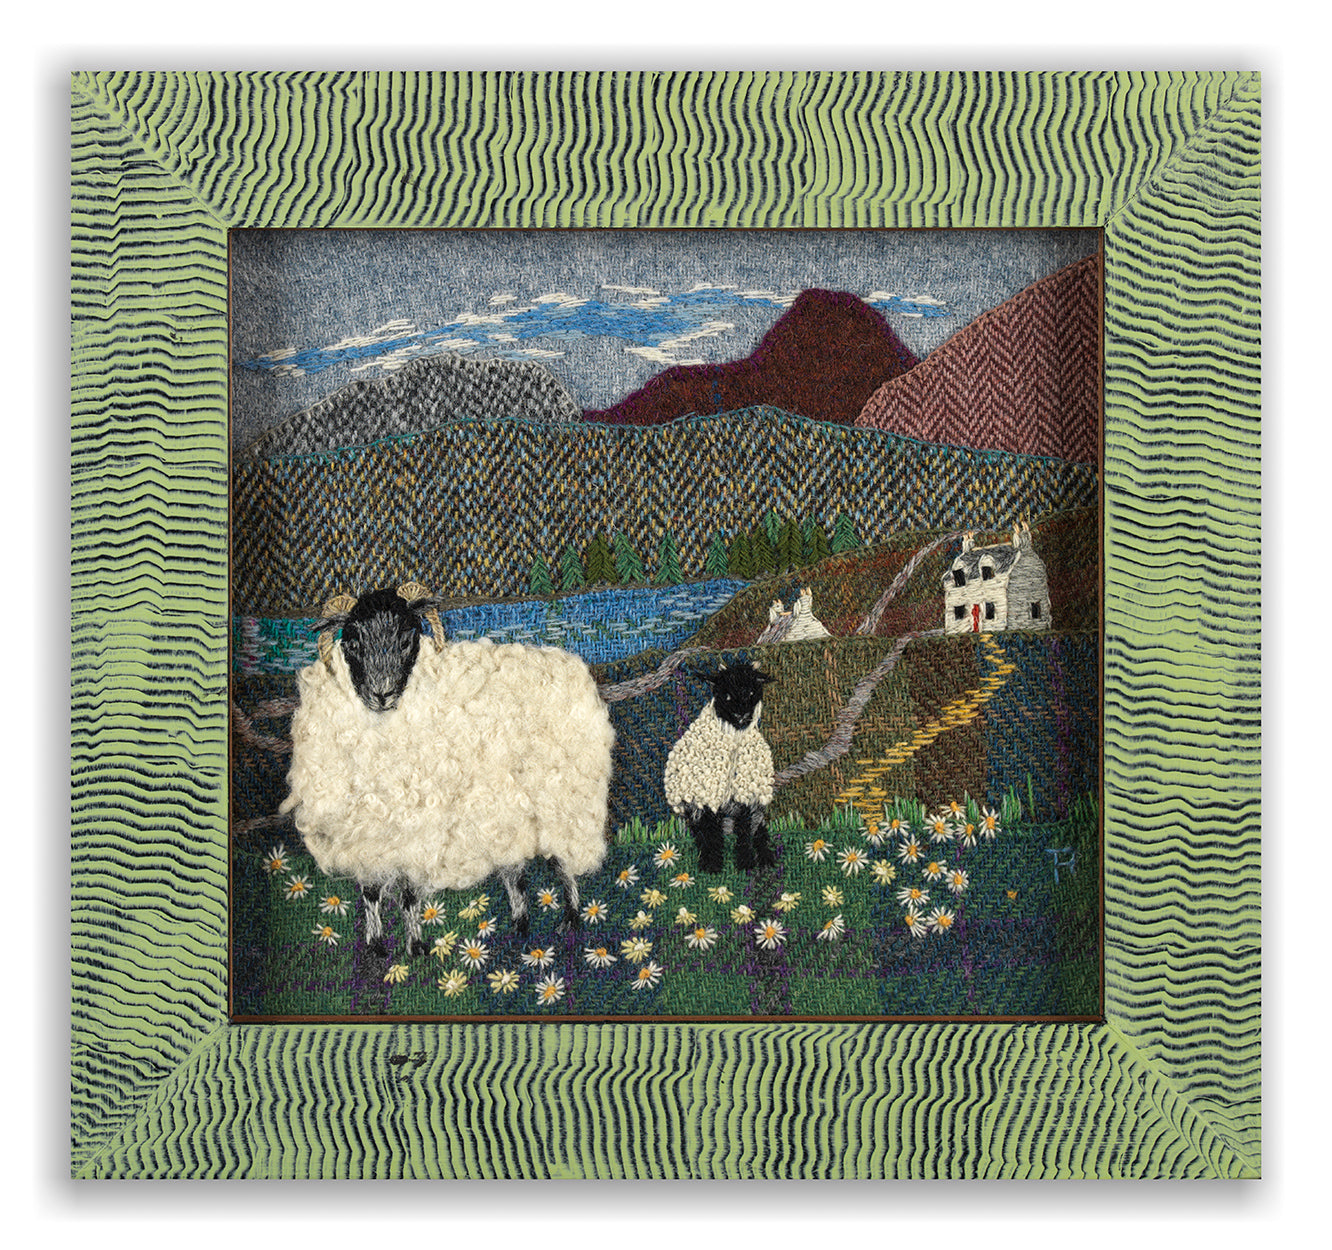 Blackface Ewe and Ram in a Field of Daisies  with Crofter’s Cottages